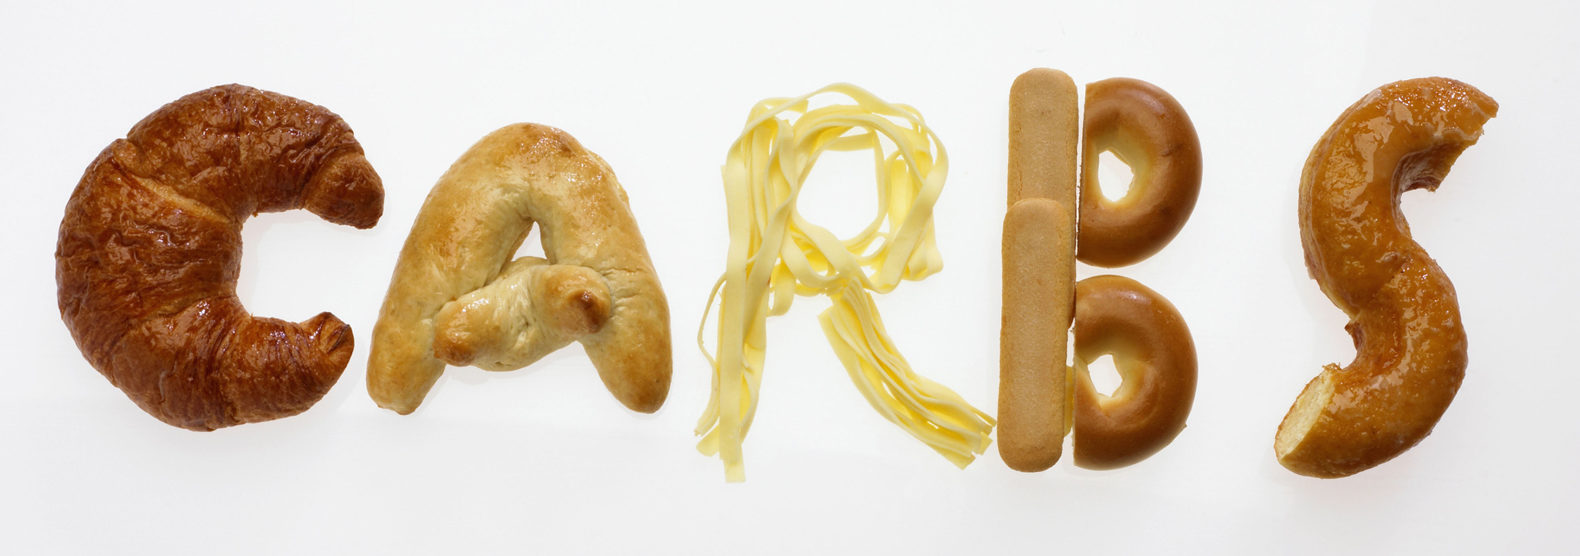 5 Myths About Carbs you Should Stop Believing